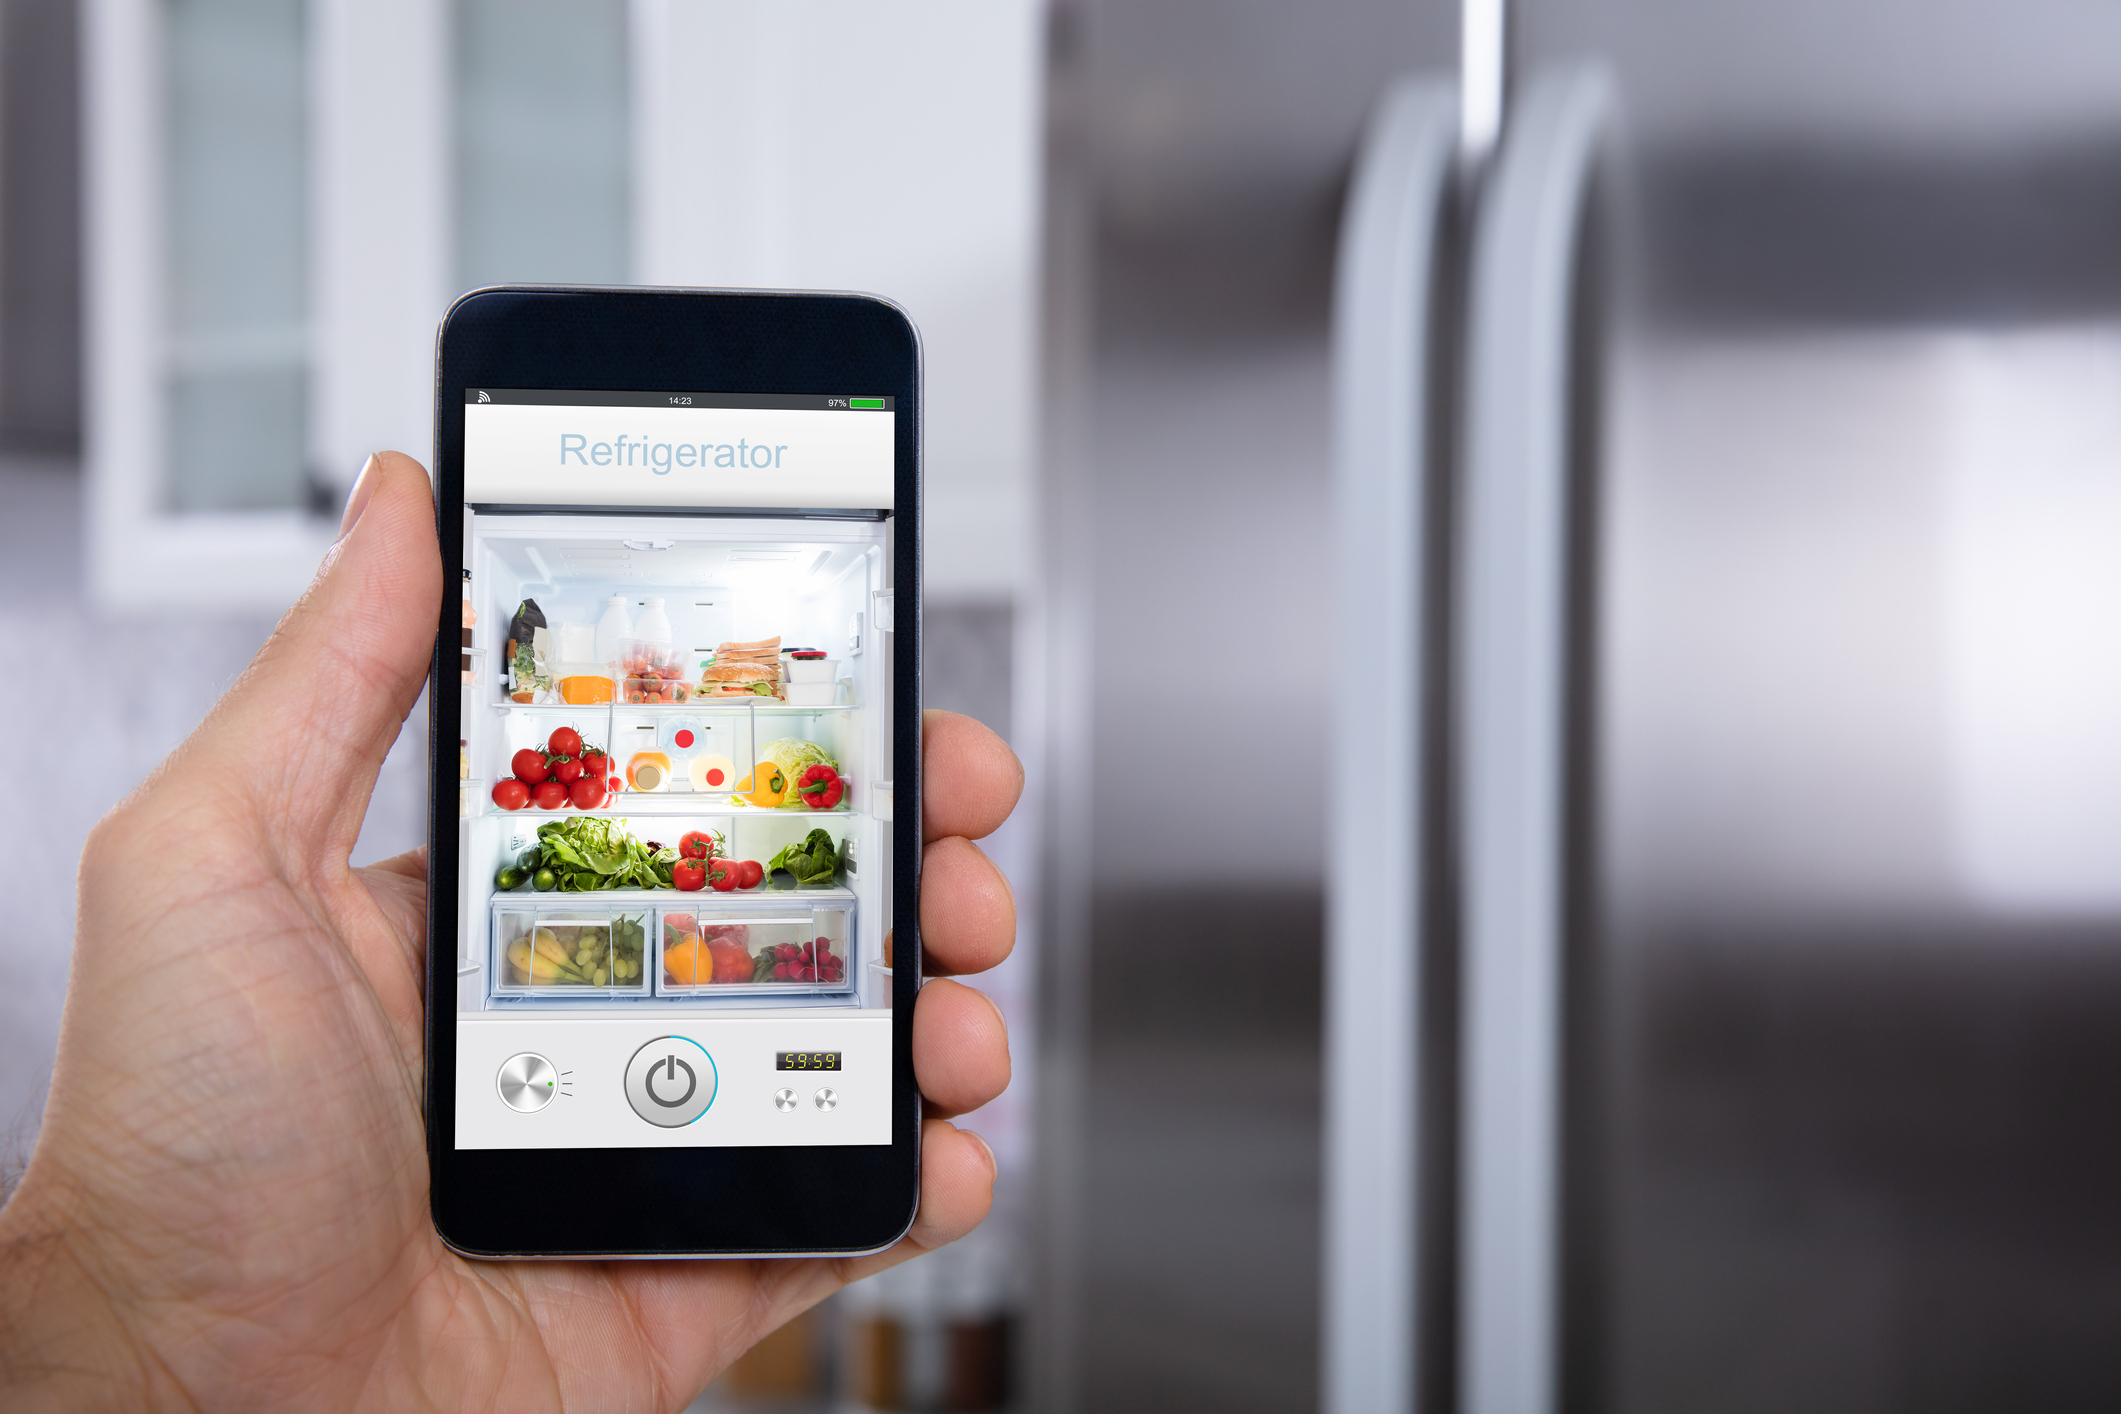 Smart appliances: conditioners and refrigerators will have the